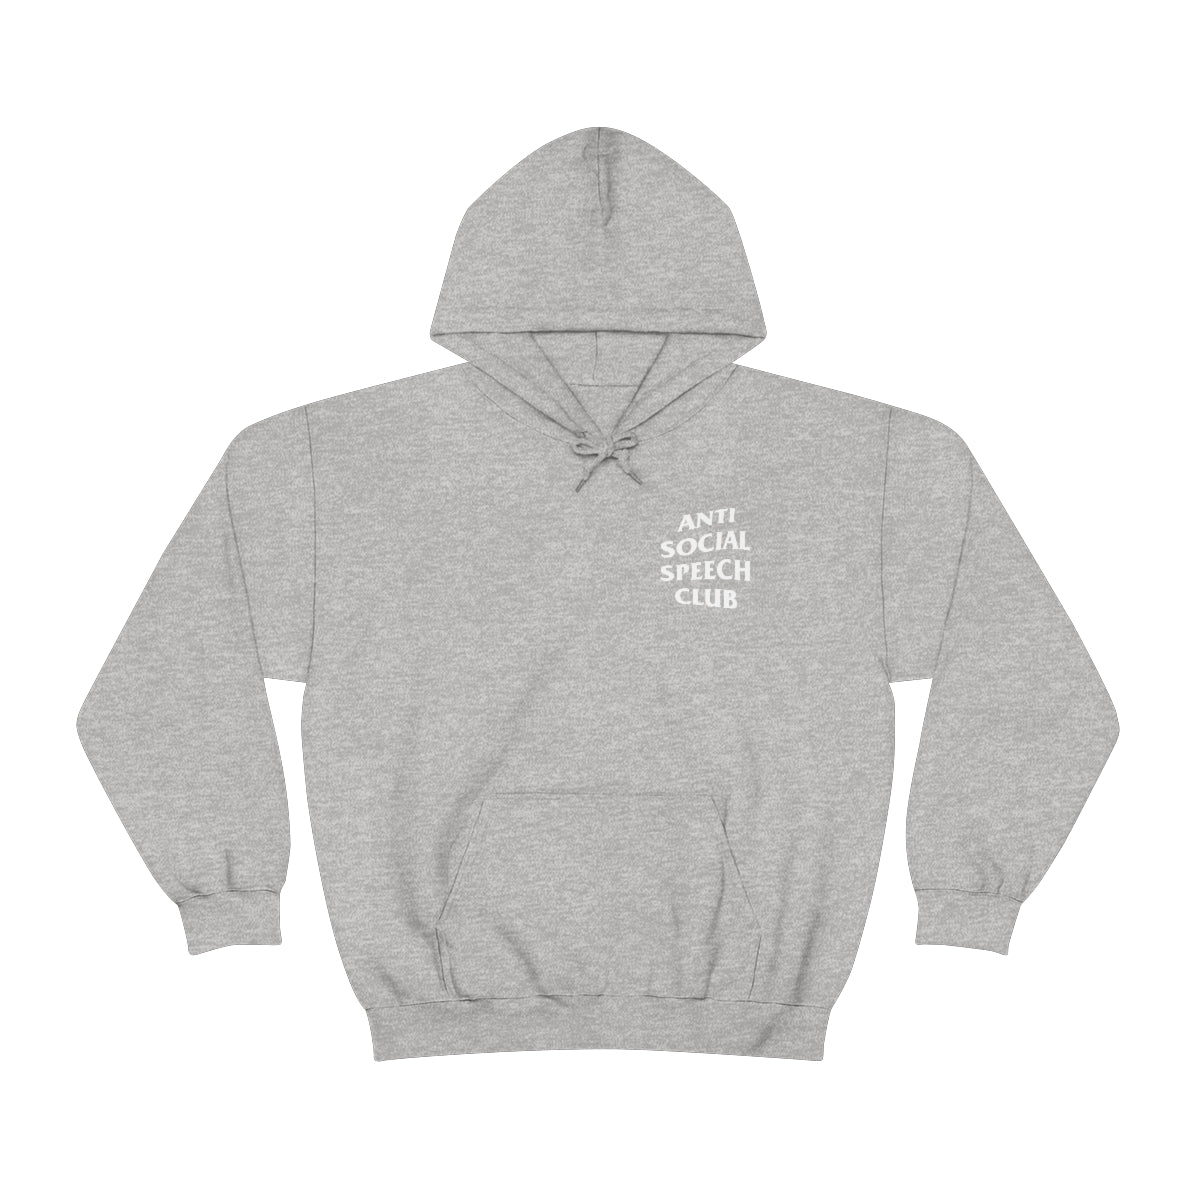 Antisocial Speech Club Hoodie | Front and Back Print